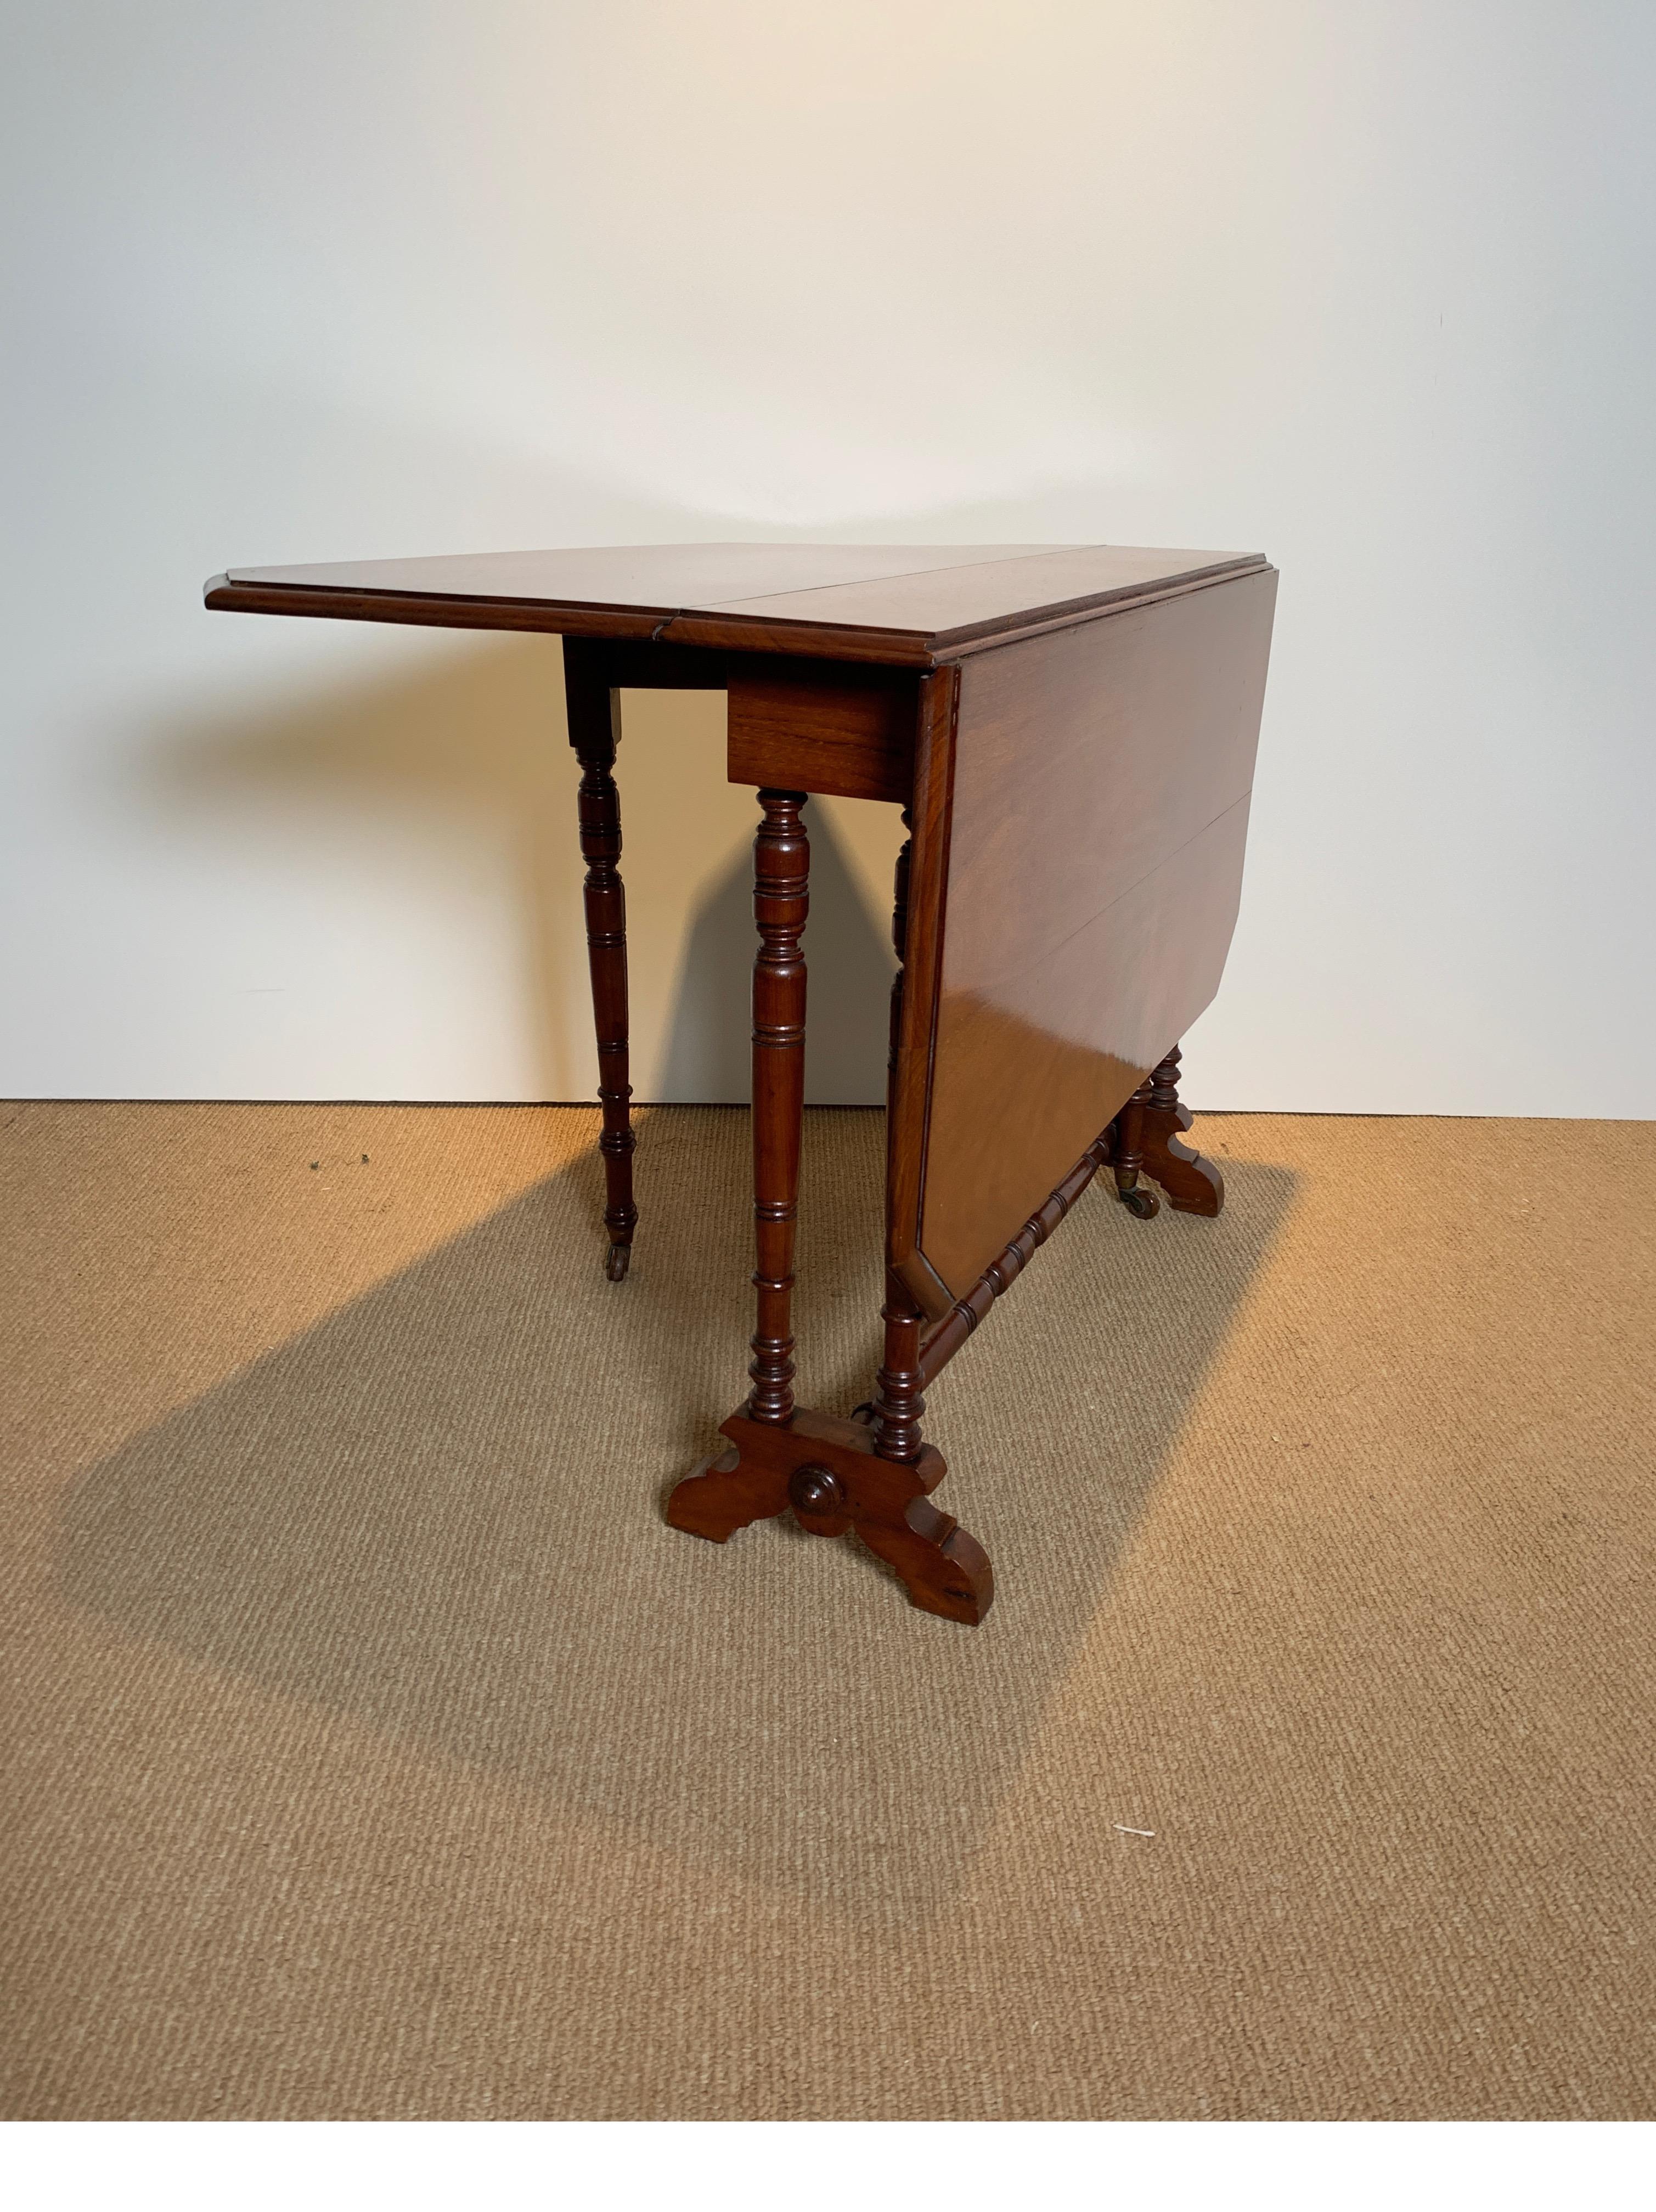 A charming solid mahogany drop-leaf table. England circa 1880. The table with deep leaves which opens fully to 37 inches wide, flods down to only 7 inches. A perfect working table that can be tucked away as a narrow side table. The legs are